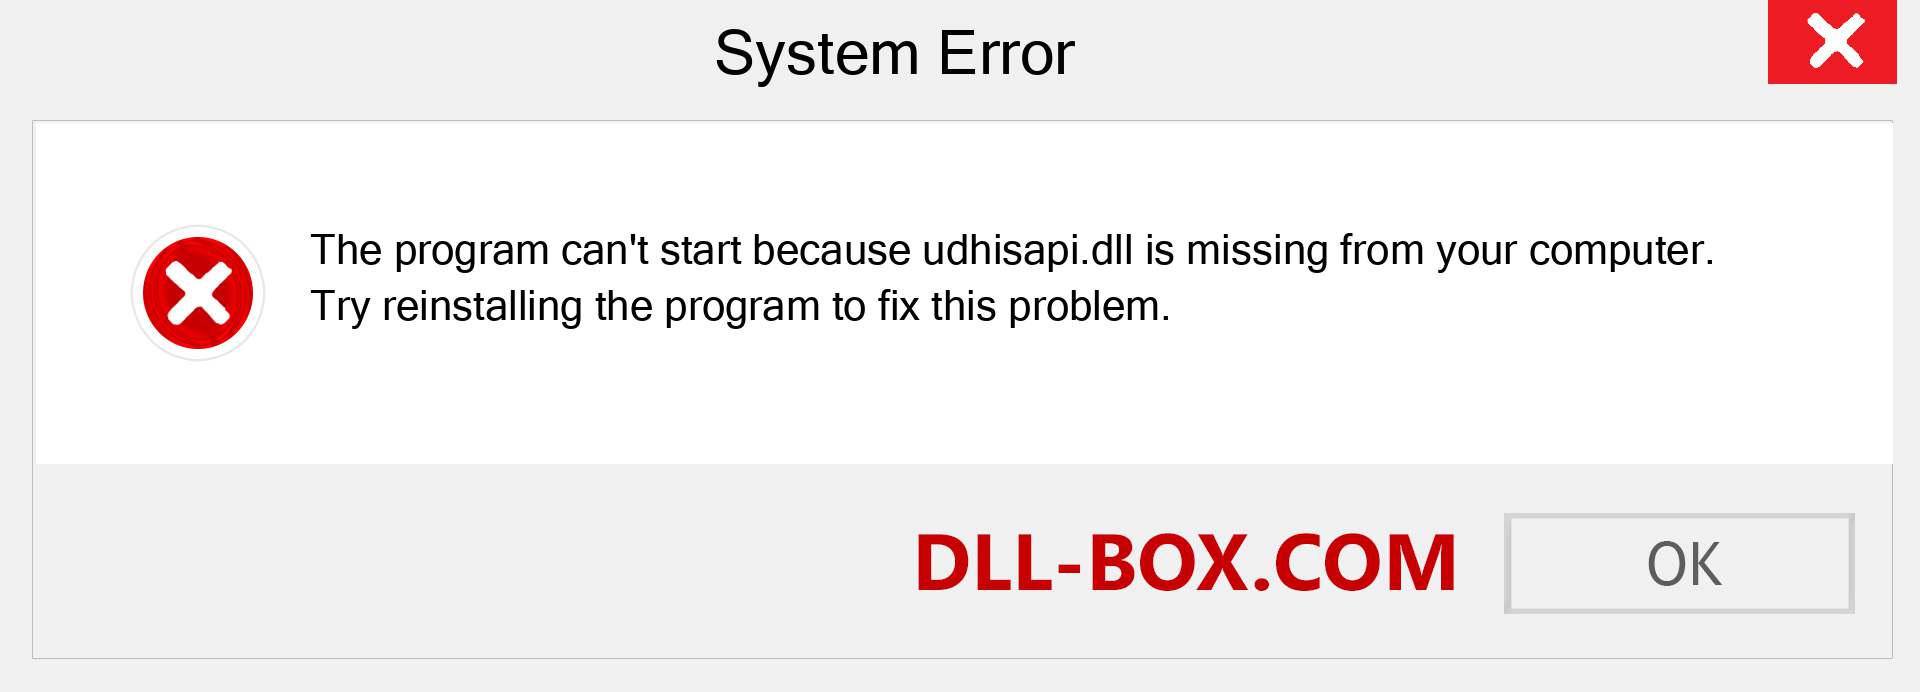  udhisapi.dll file is missing?. Download for Windows 7, 8, 10 - Fix  udhisapi dll Missing Error on Windows, photos, images